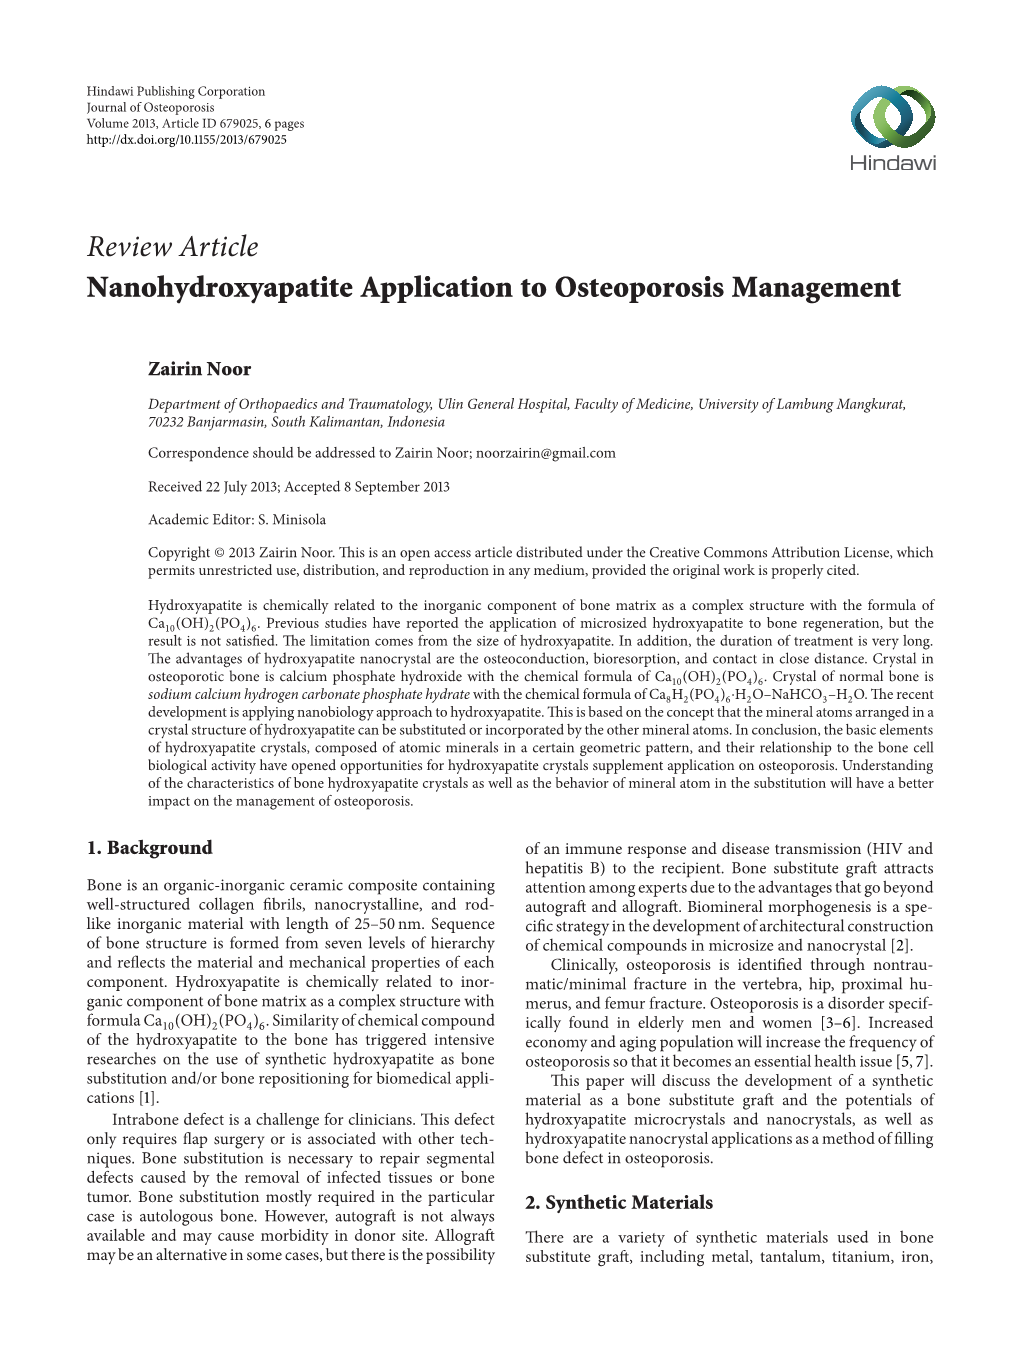 Review Article Nanohydroxyapatite Application to Osteoporosis Management